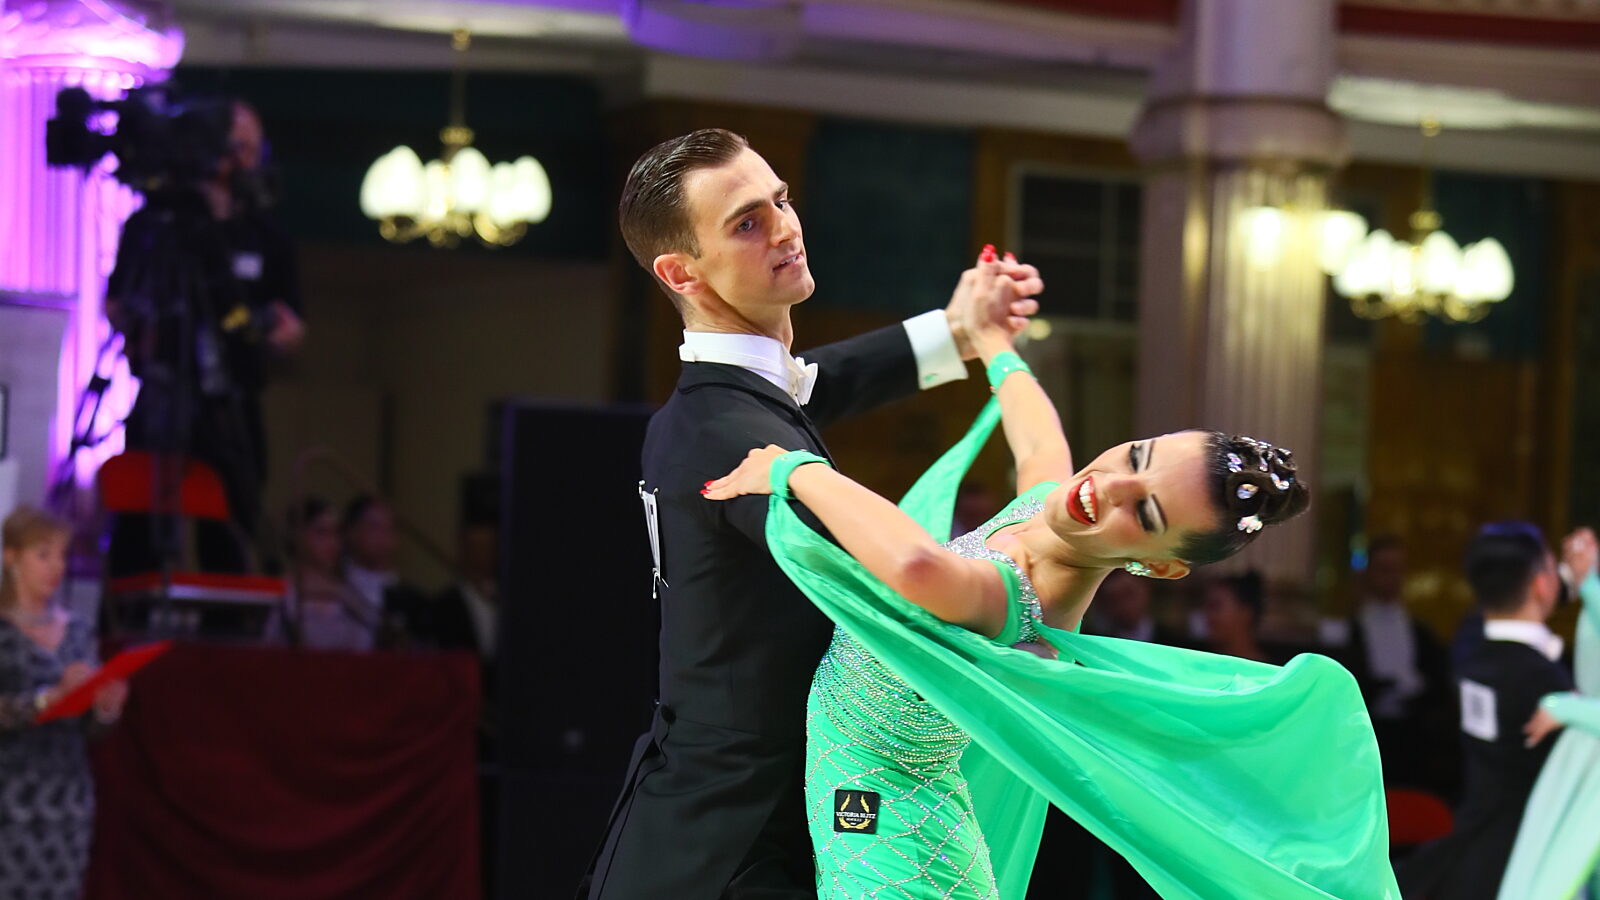 Two ballroom dancers dancing wearing a green dress and suit.